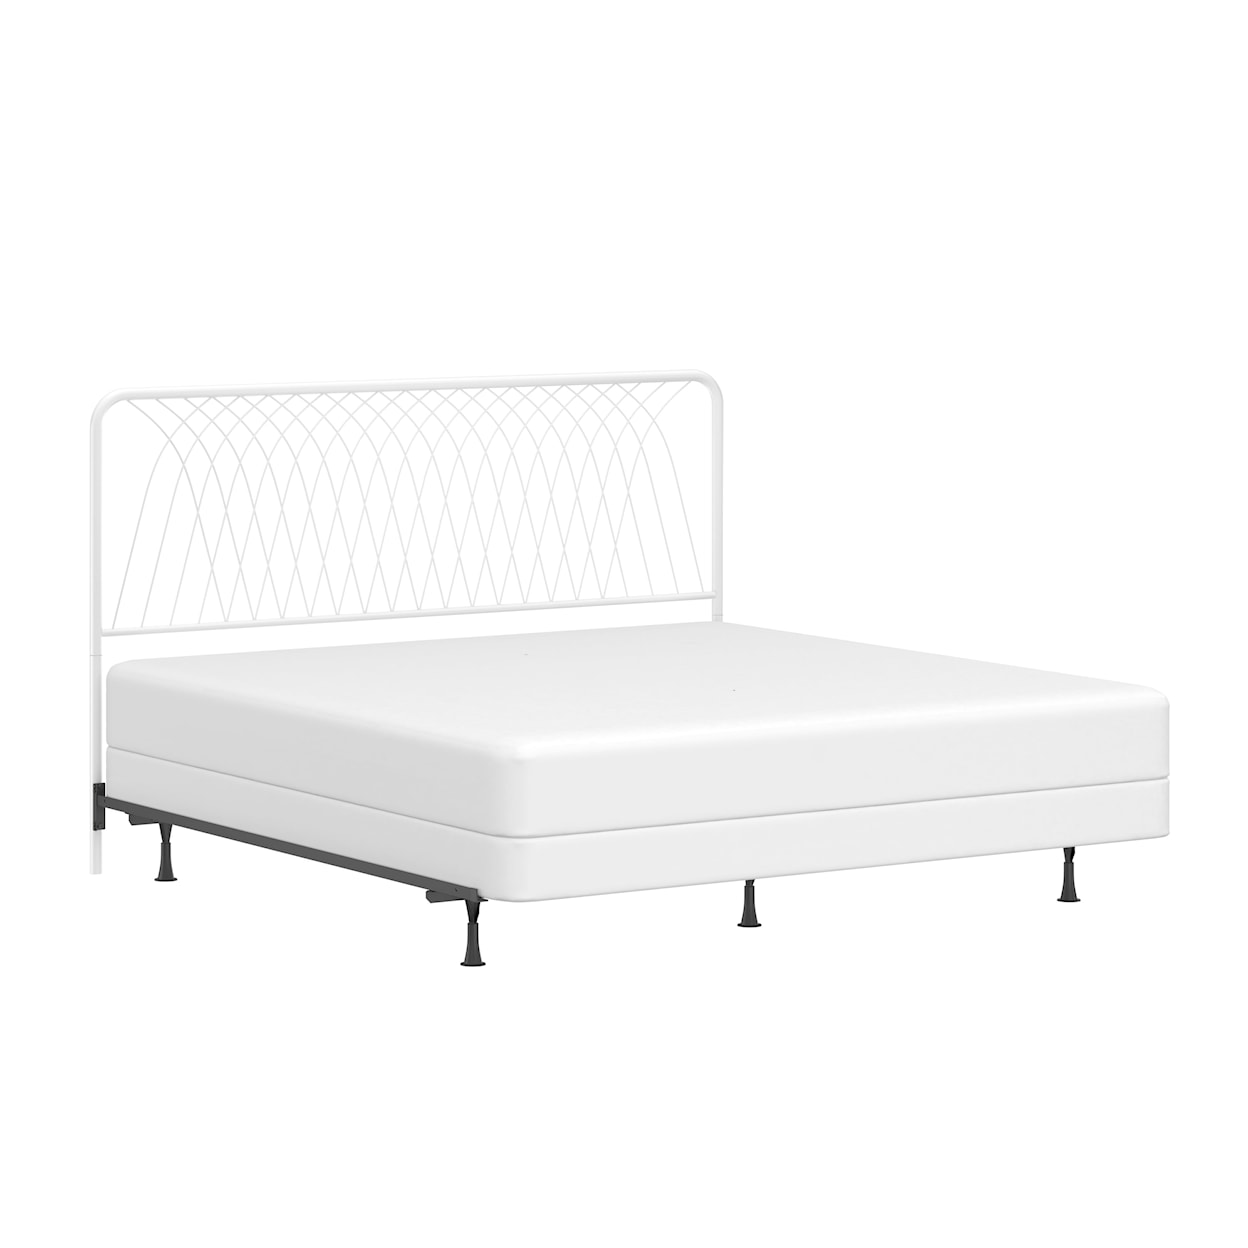 Hillsdale Alicia King Bed Frame